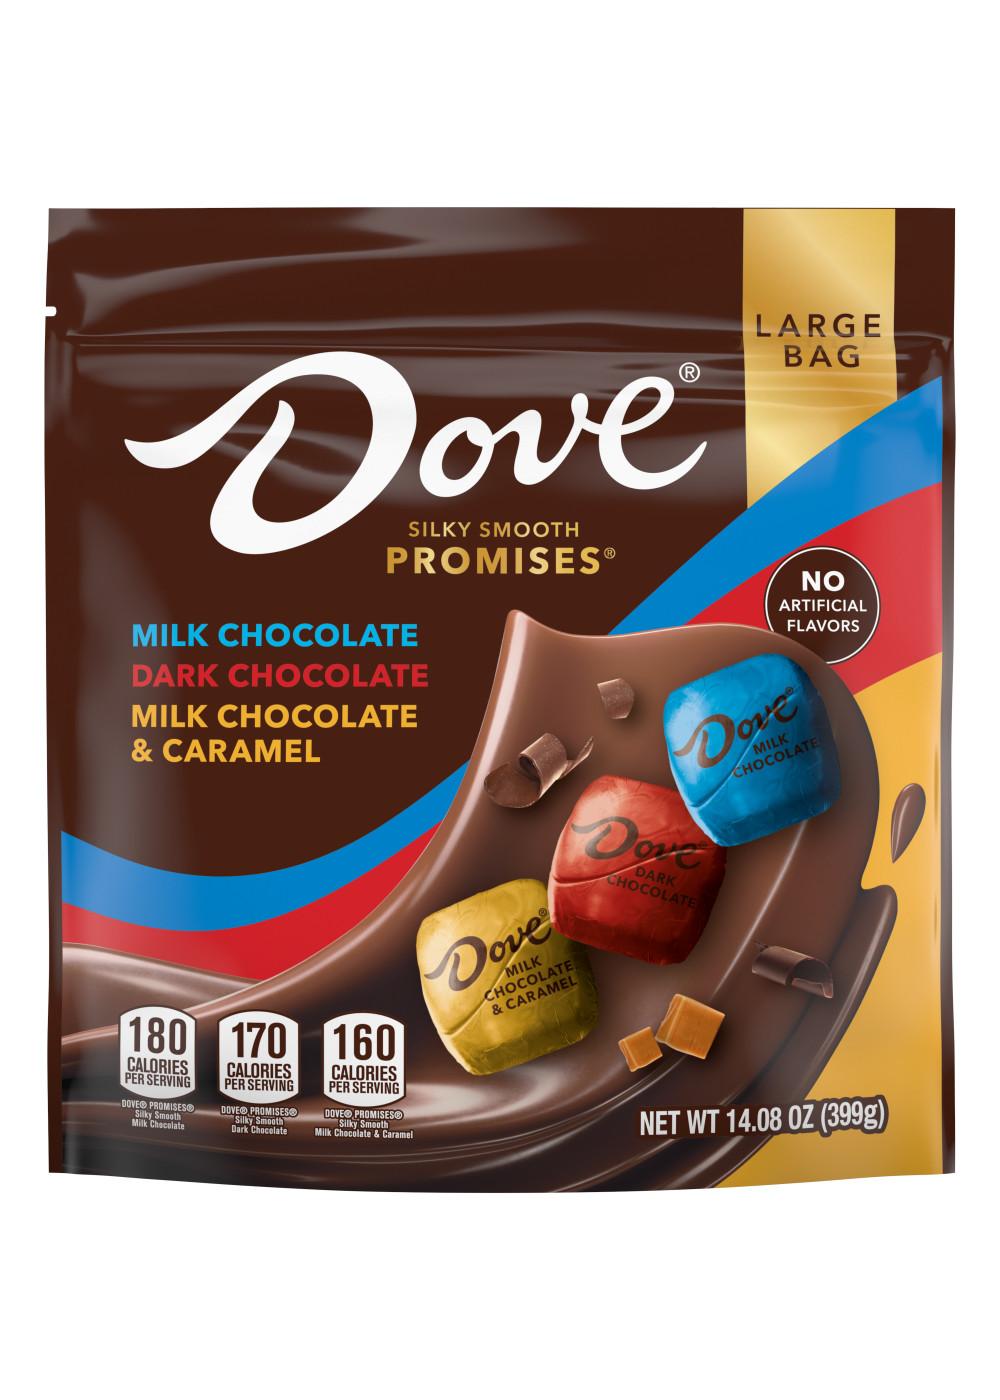 Dove Promises Assorted Chocolate Candy - Large Bag; image 1 of 7